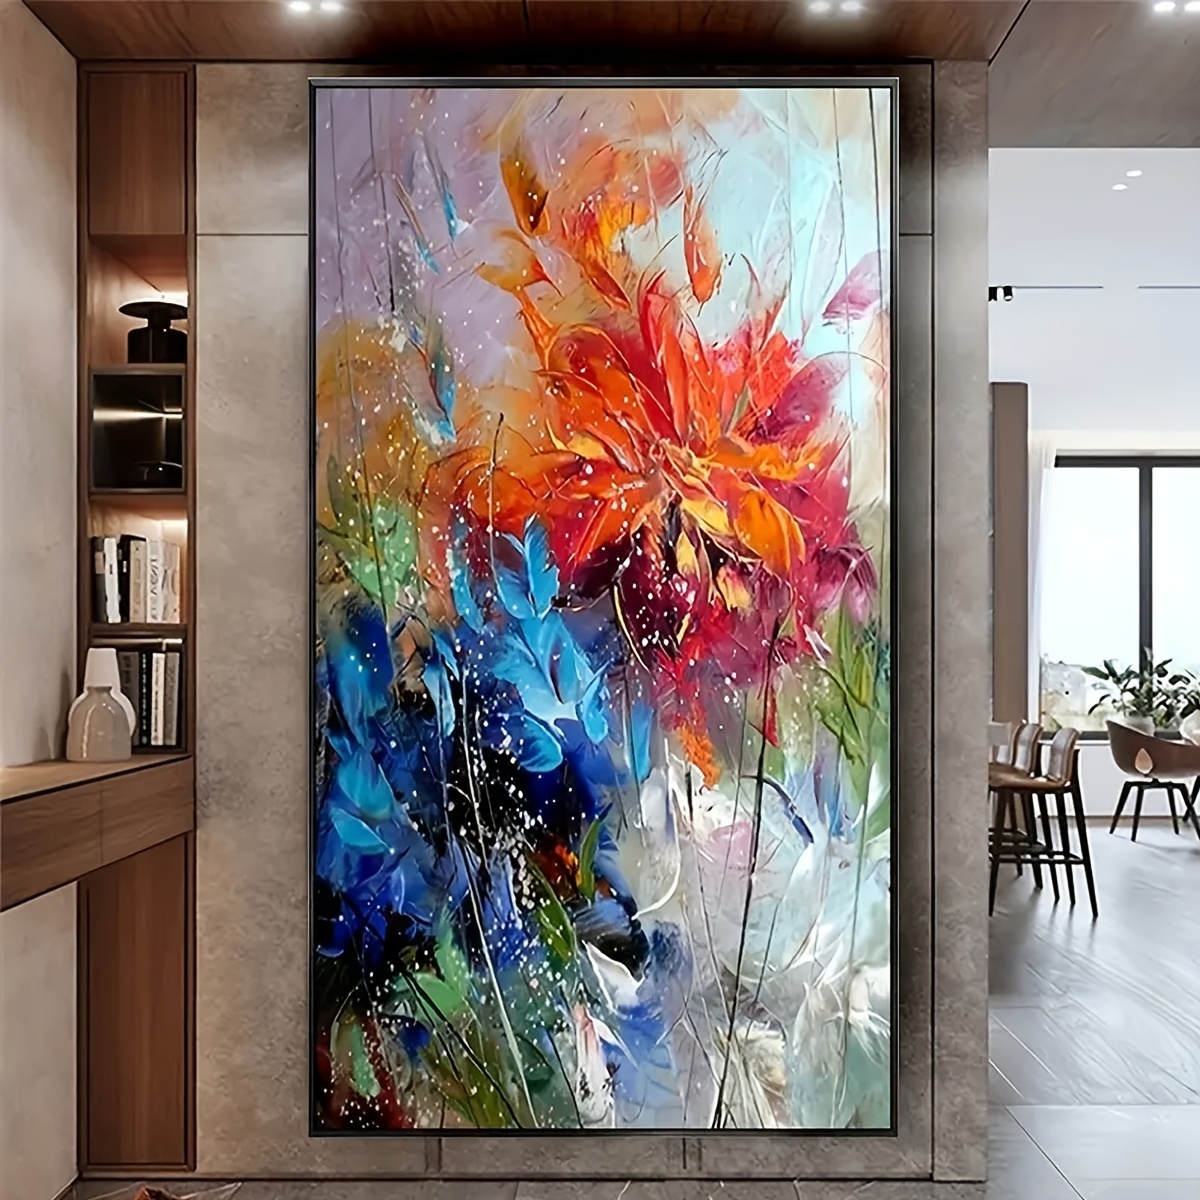 Floral Wall Tapestries to Match Any Home's Decor